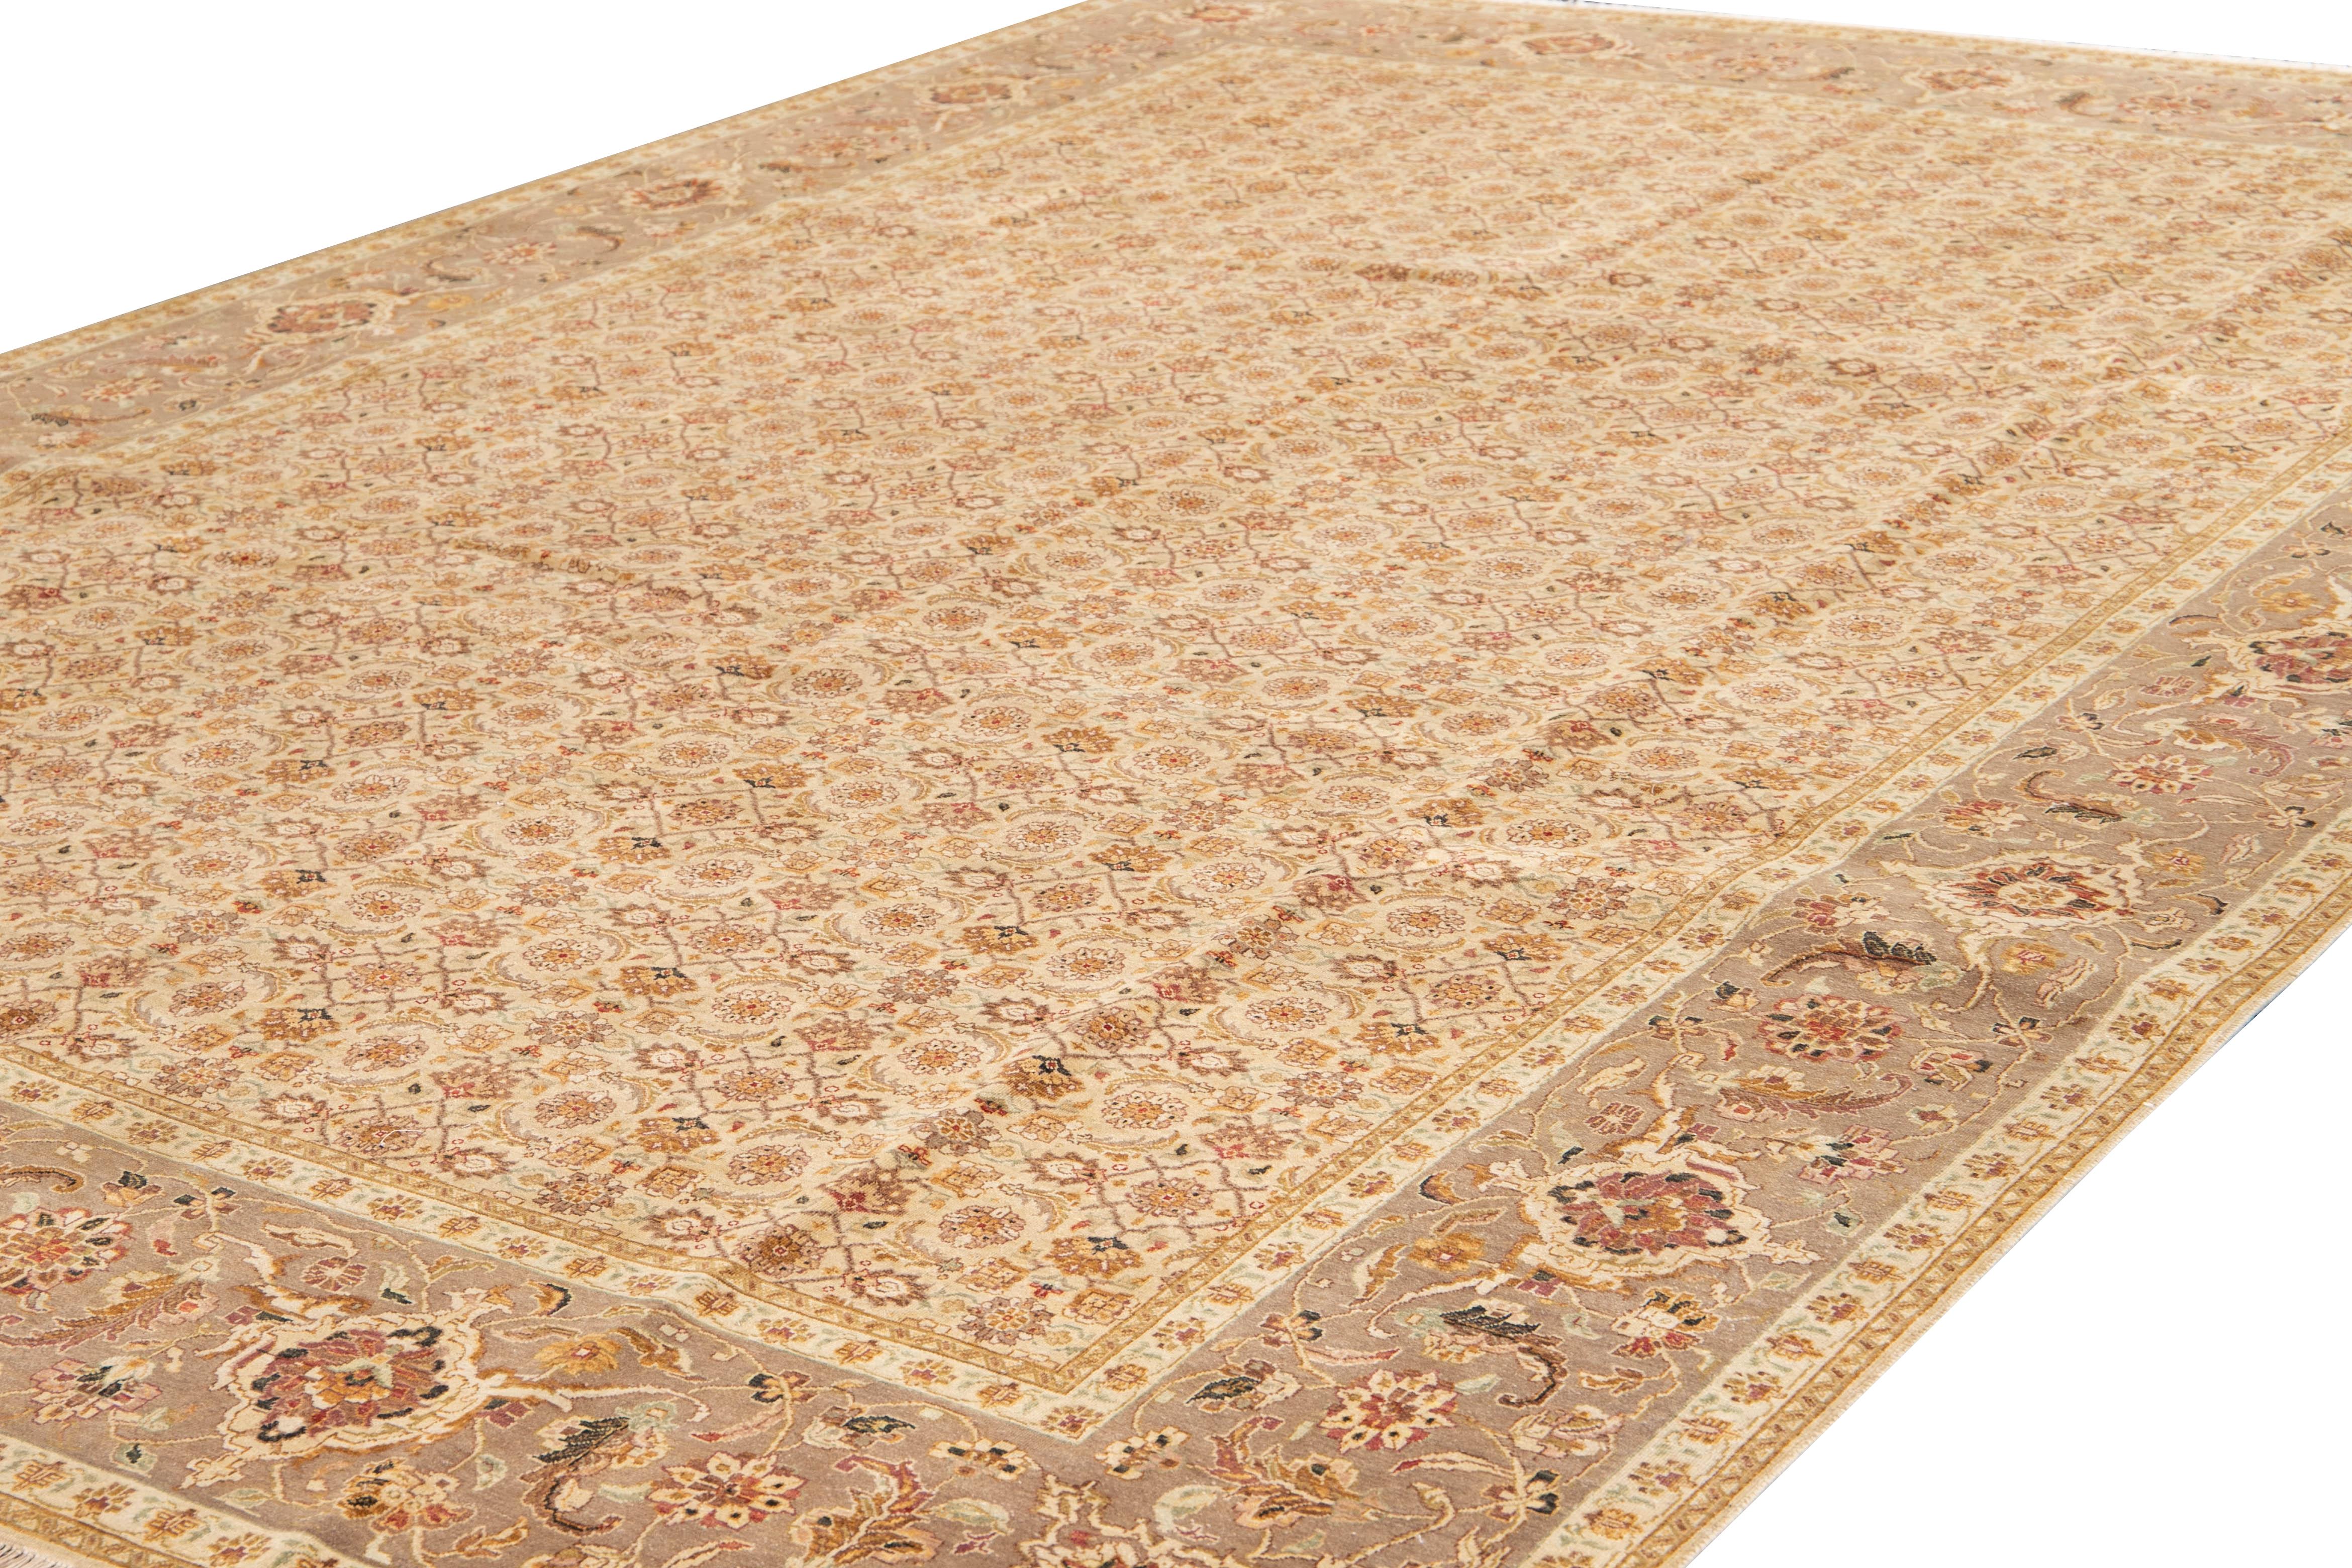 Beautiful antique Tabriz-style hand-knotted wool rug with a beige-cream color field. This piece has a red, brown, and green accent in a gorgeous floral design.

This rug measures 10'1